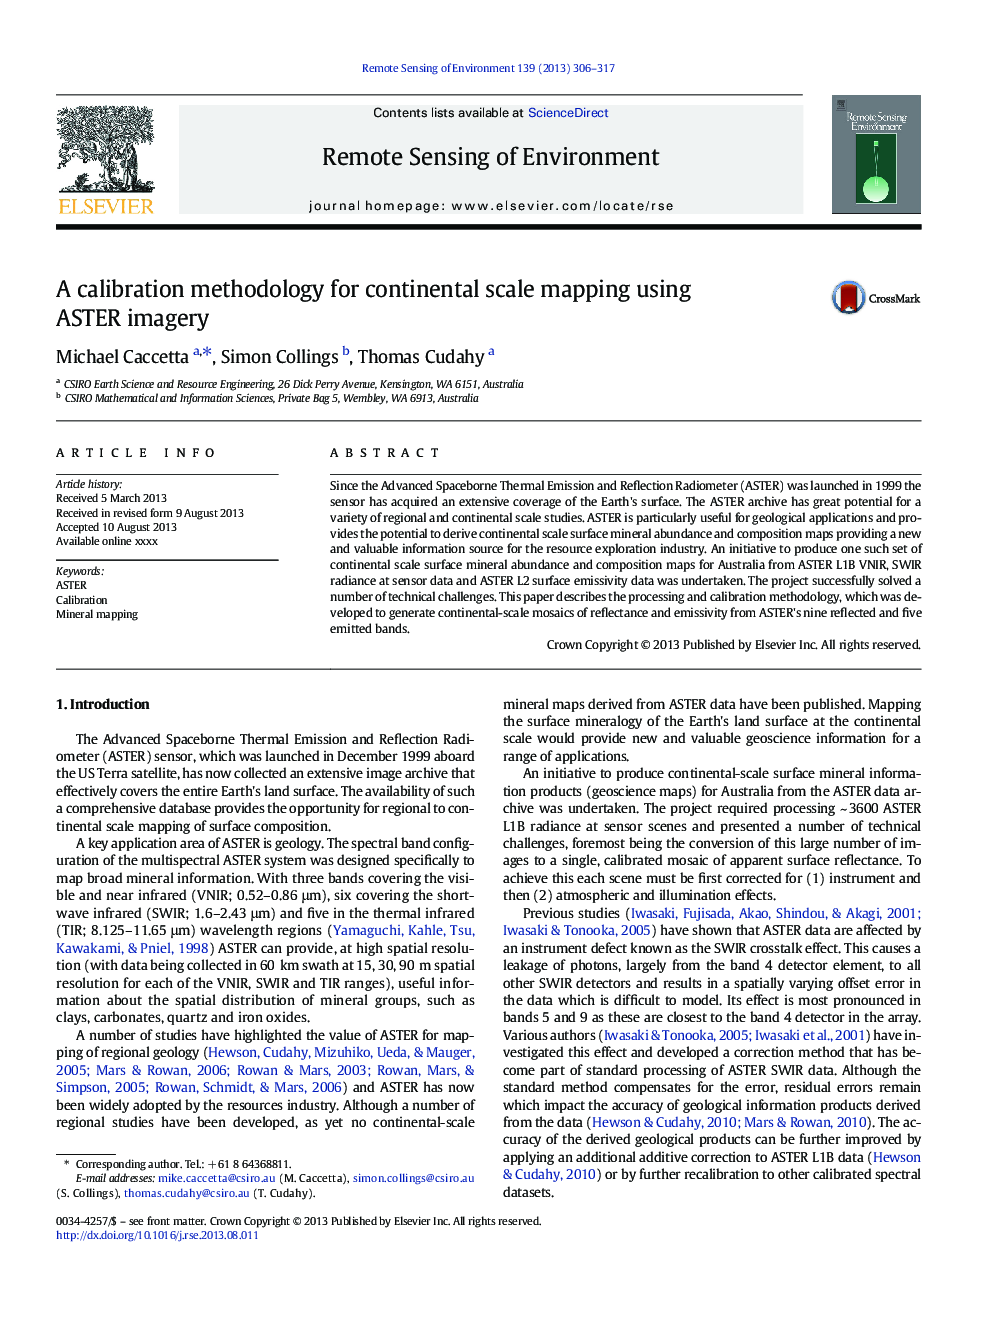 A calibration methodology for continental scale mapping using ASTER imagery